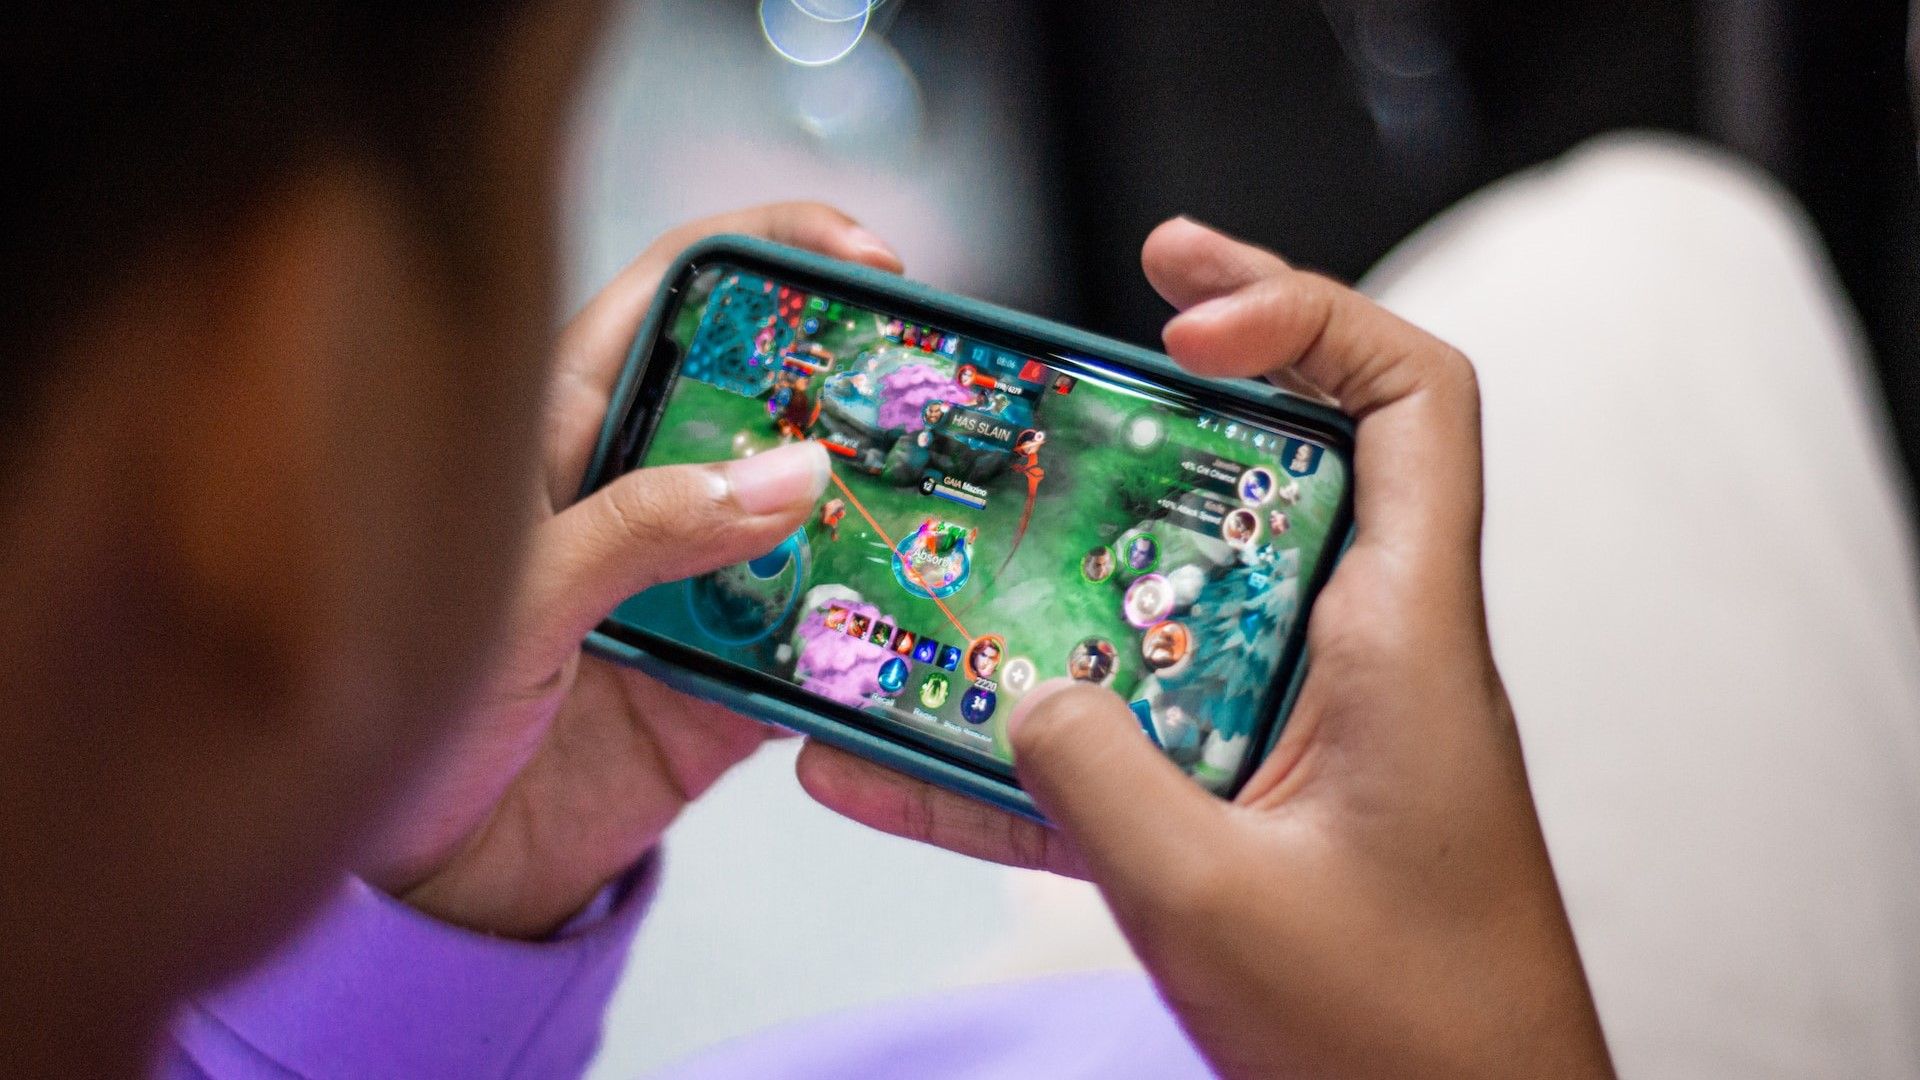 A person using their phone for gaming.